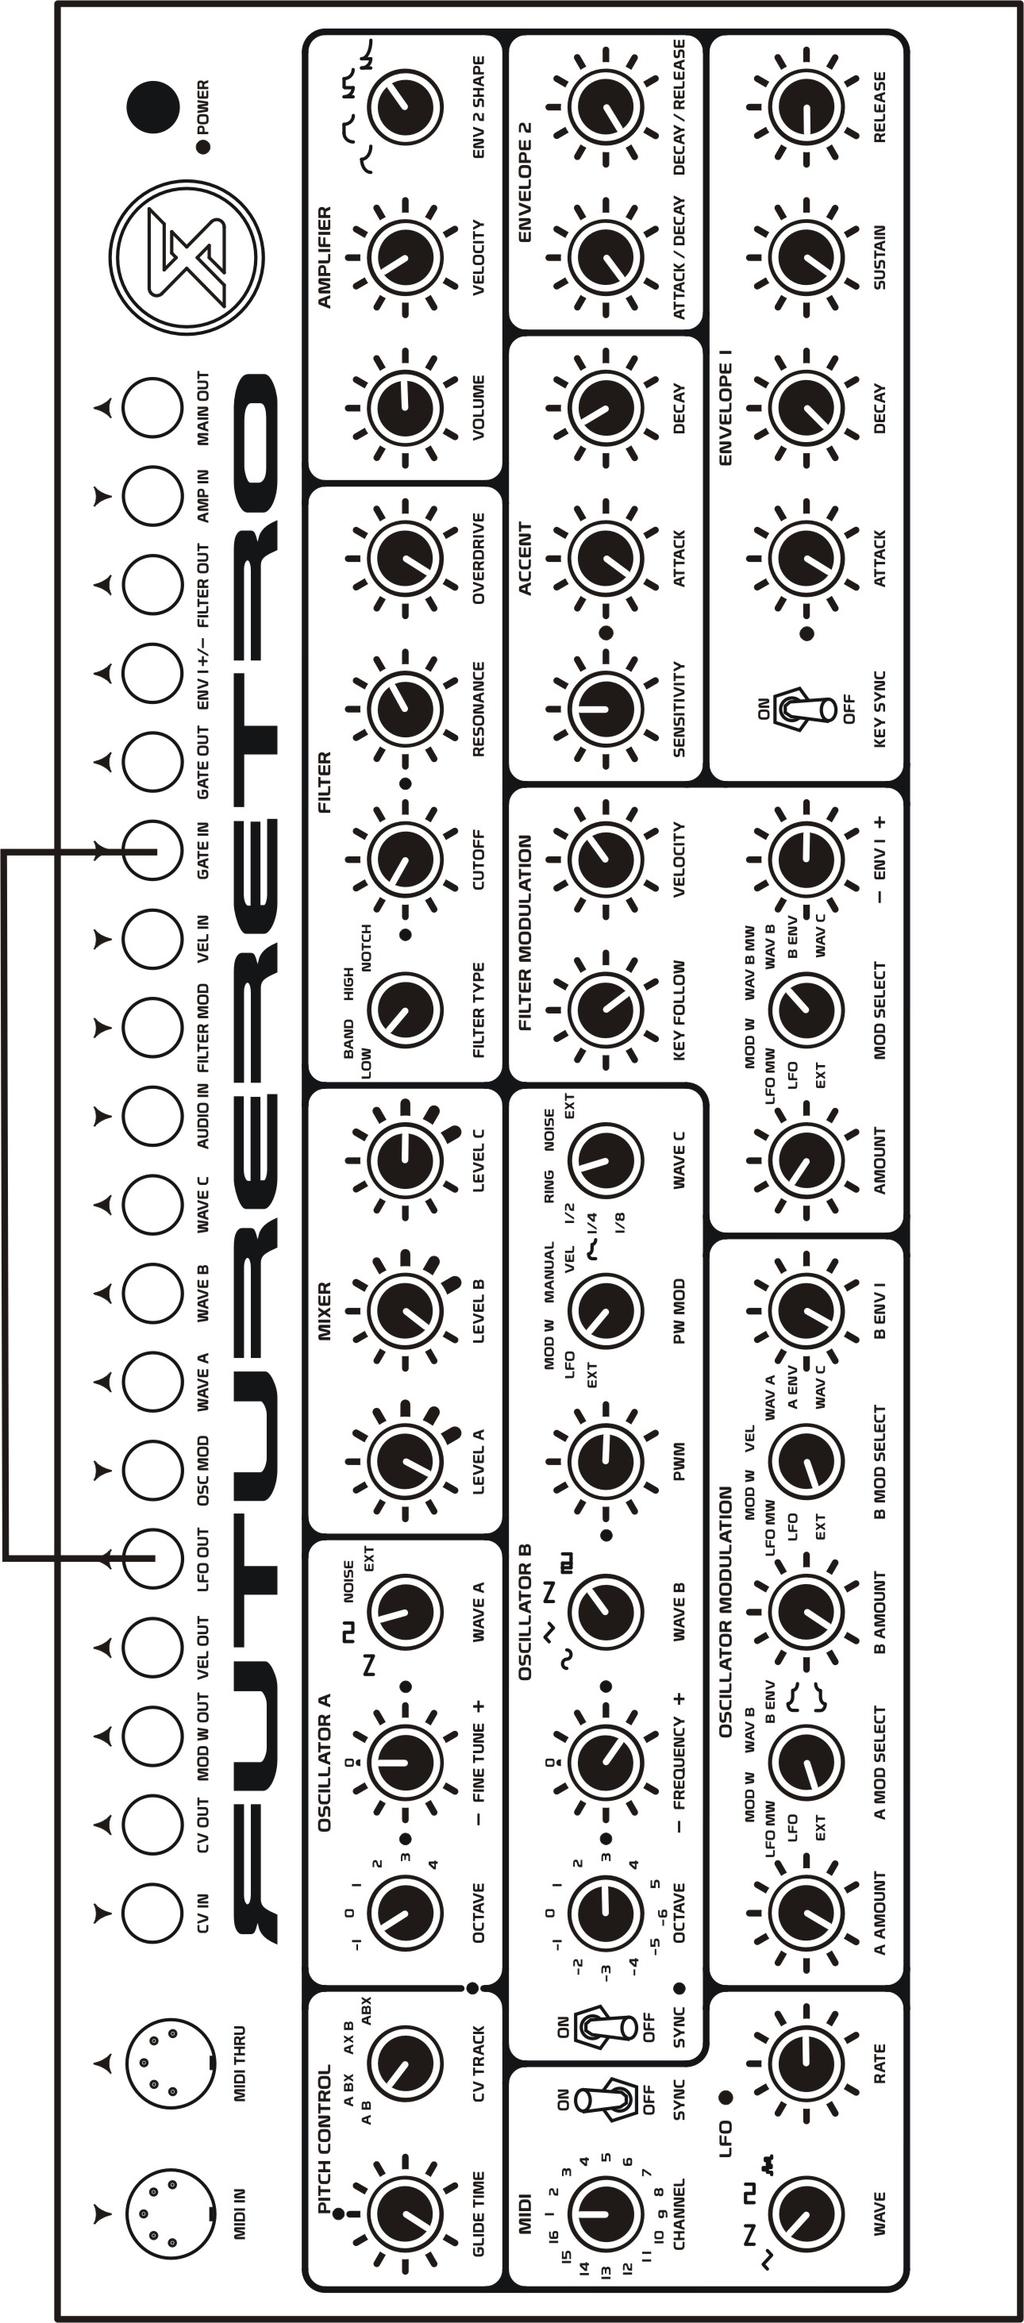 52 MIDI SYNCED PSEUDO ARPEGGIATOR Play notes on your MIDI controller or sequencer to control the pitch. Try setting the LFO to different clock divisions. Connect the LFO OUT jack to the GATE IN jack.